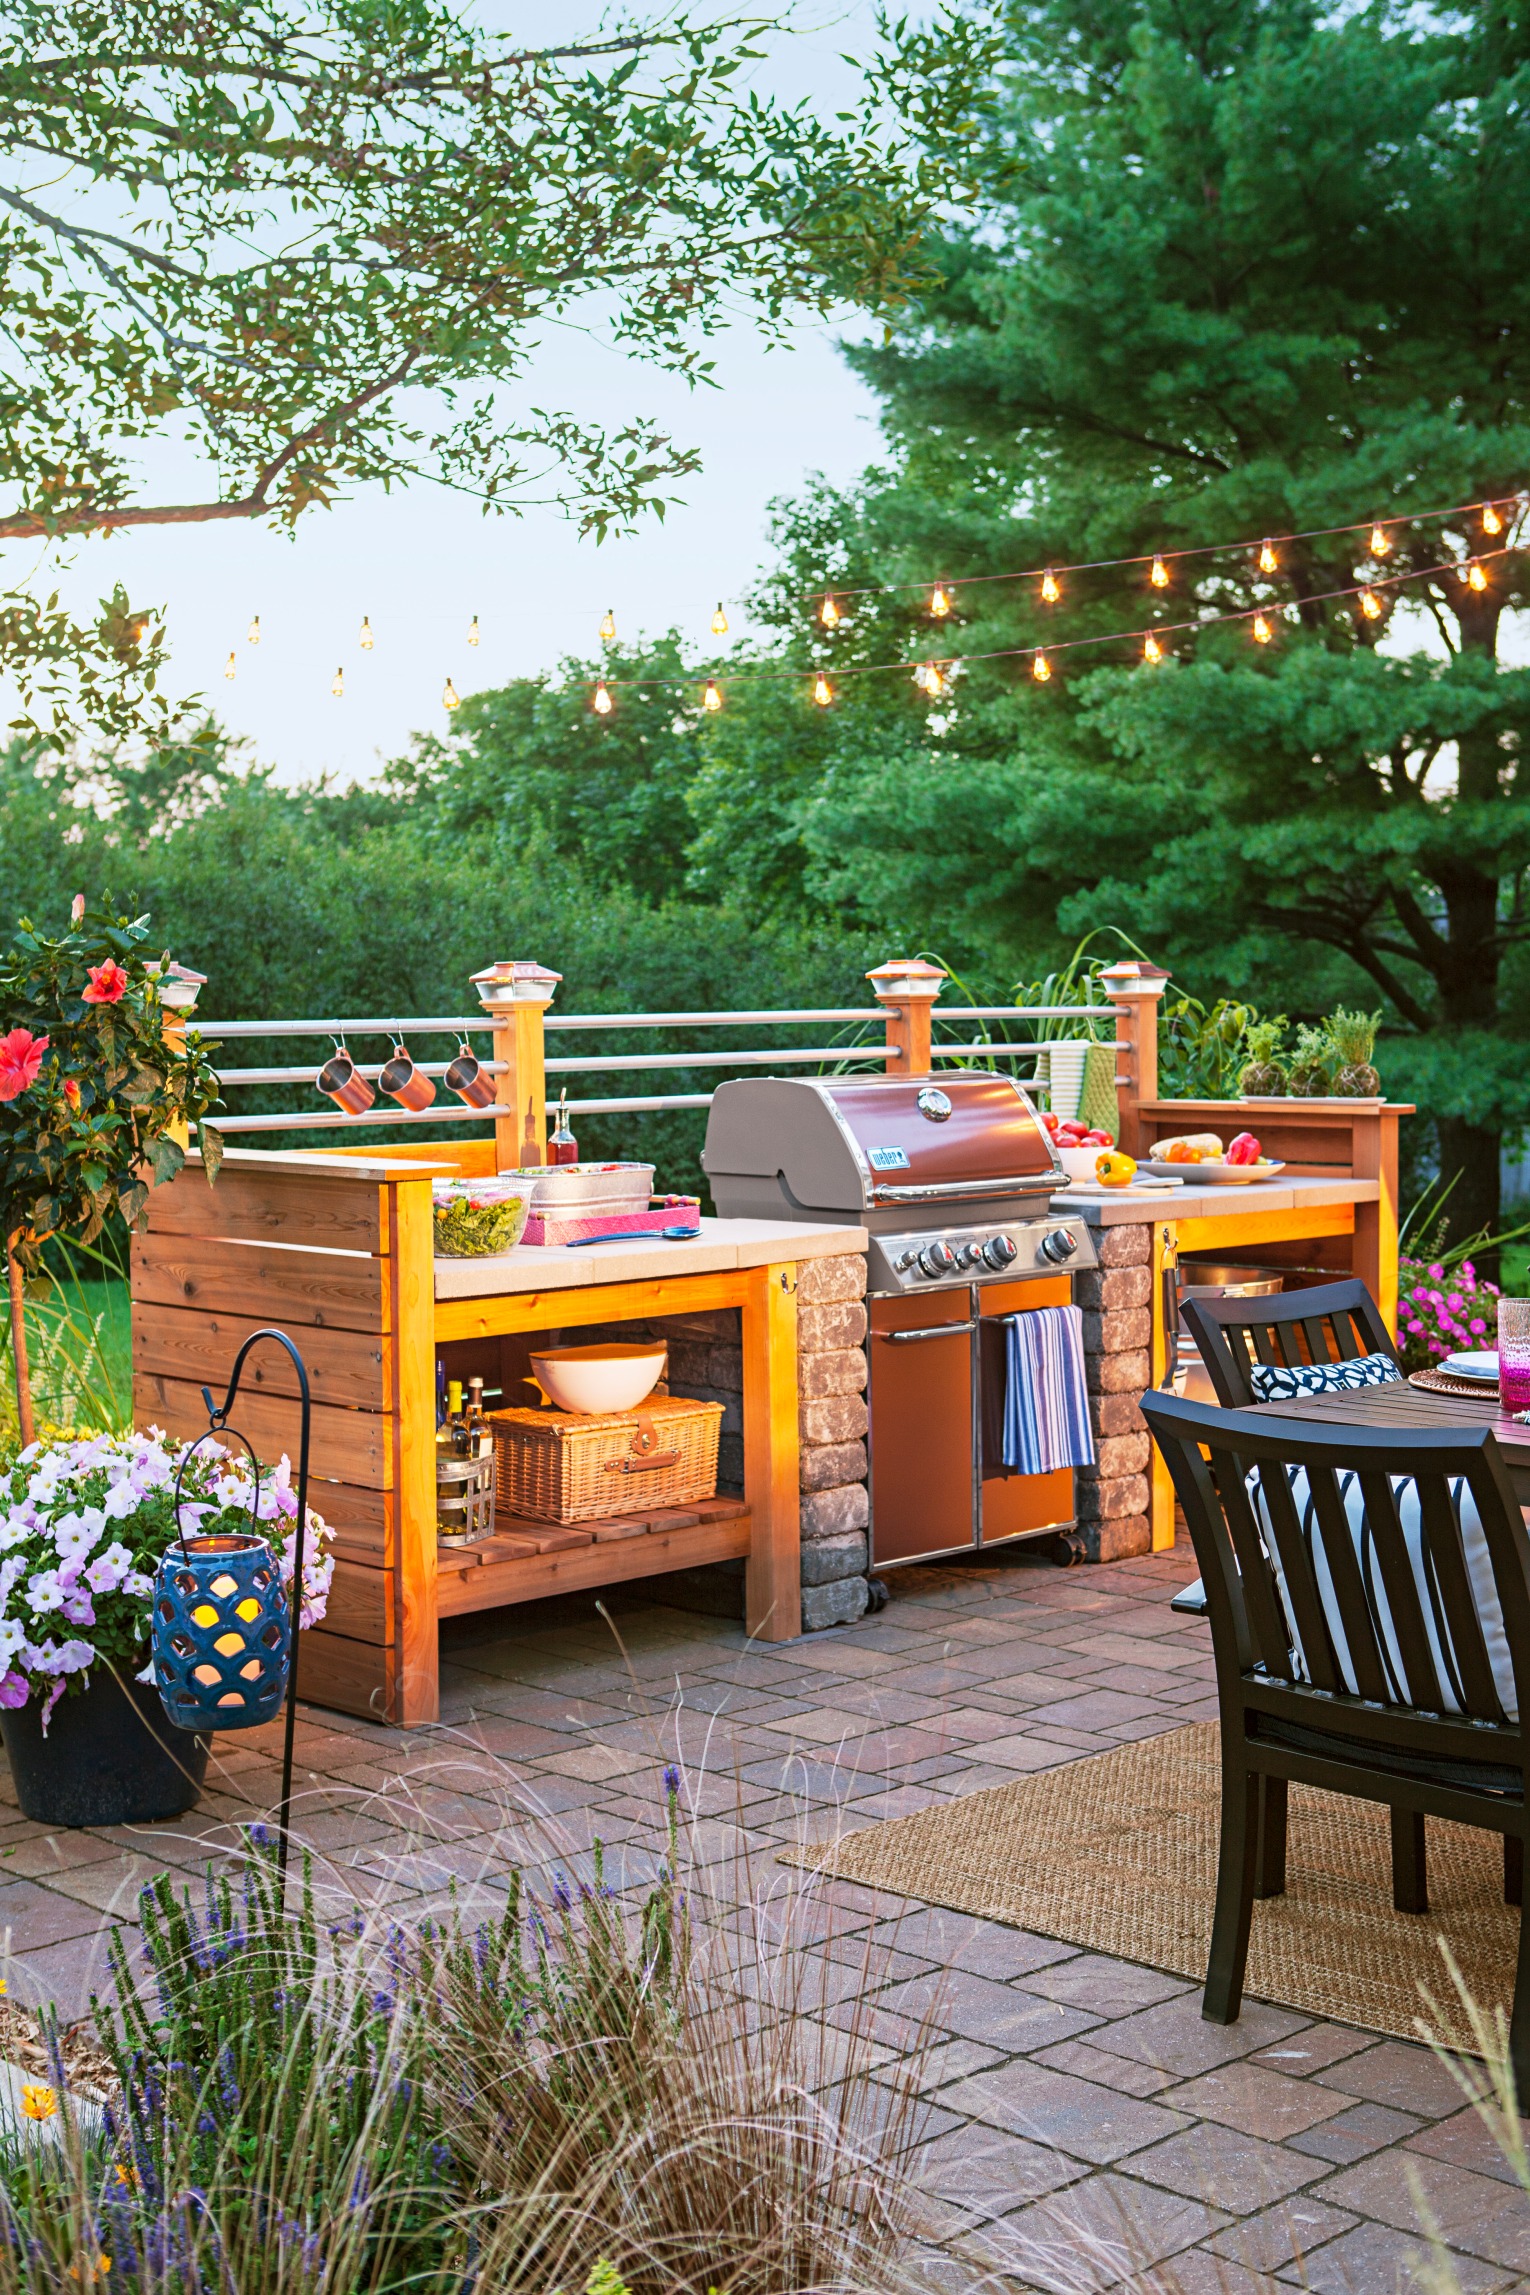 Weber gas grills surrounded by DIY cedar storage units is a quite popular way to go nowadays.